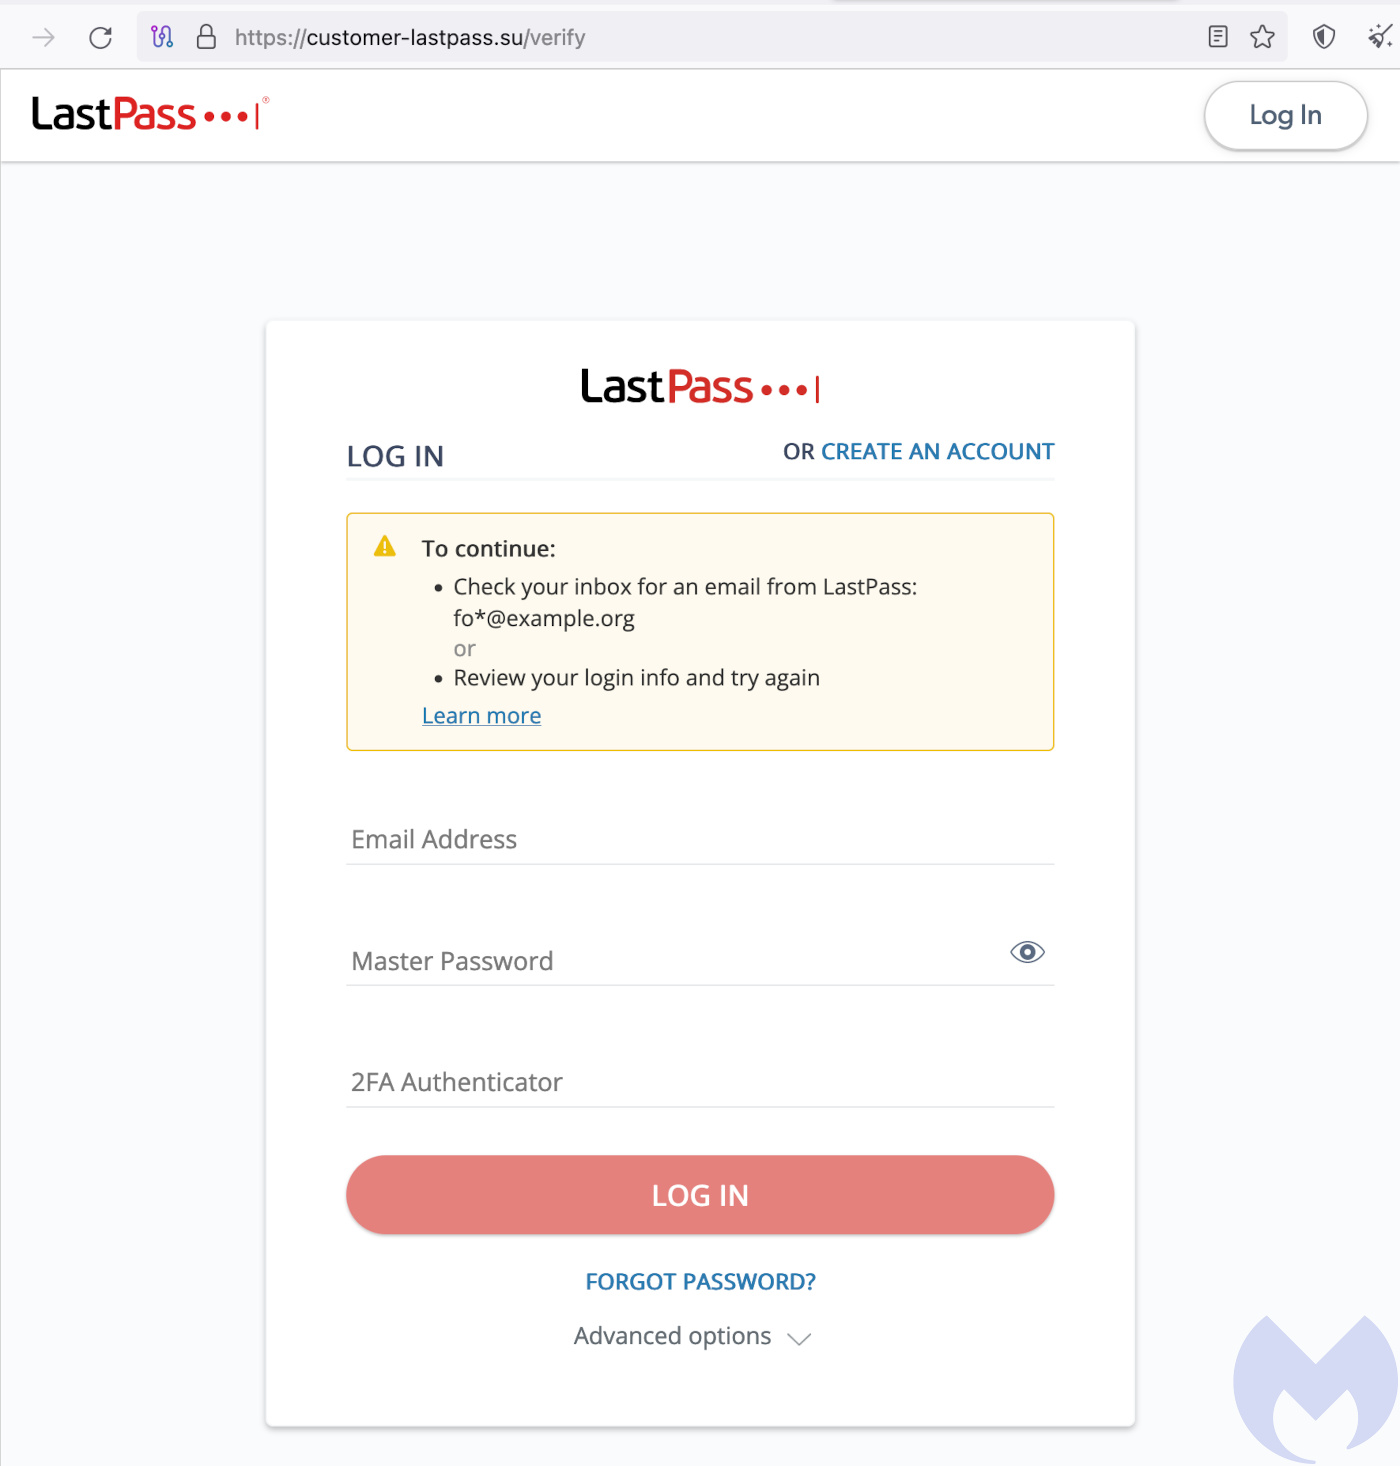 LastPass phishing page asks for username, password, and 2FA code